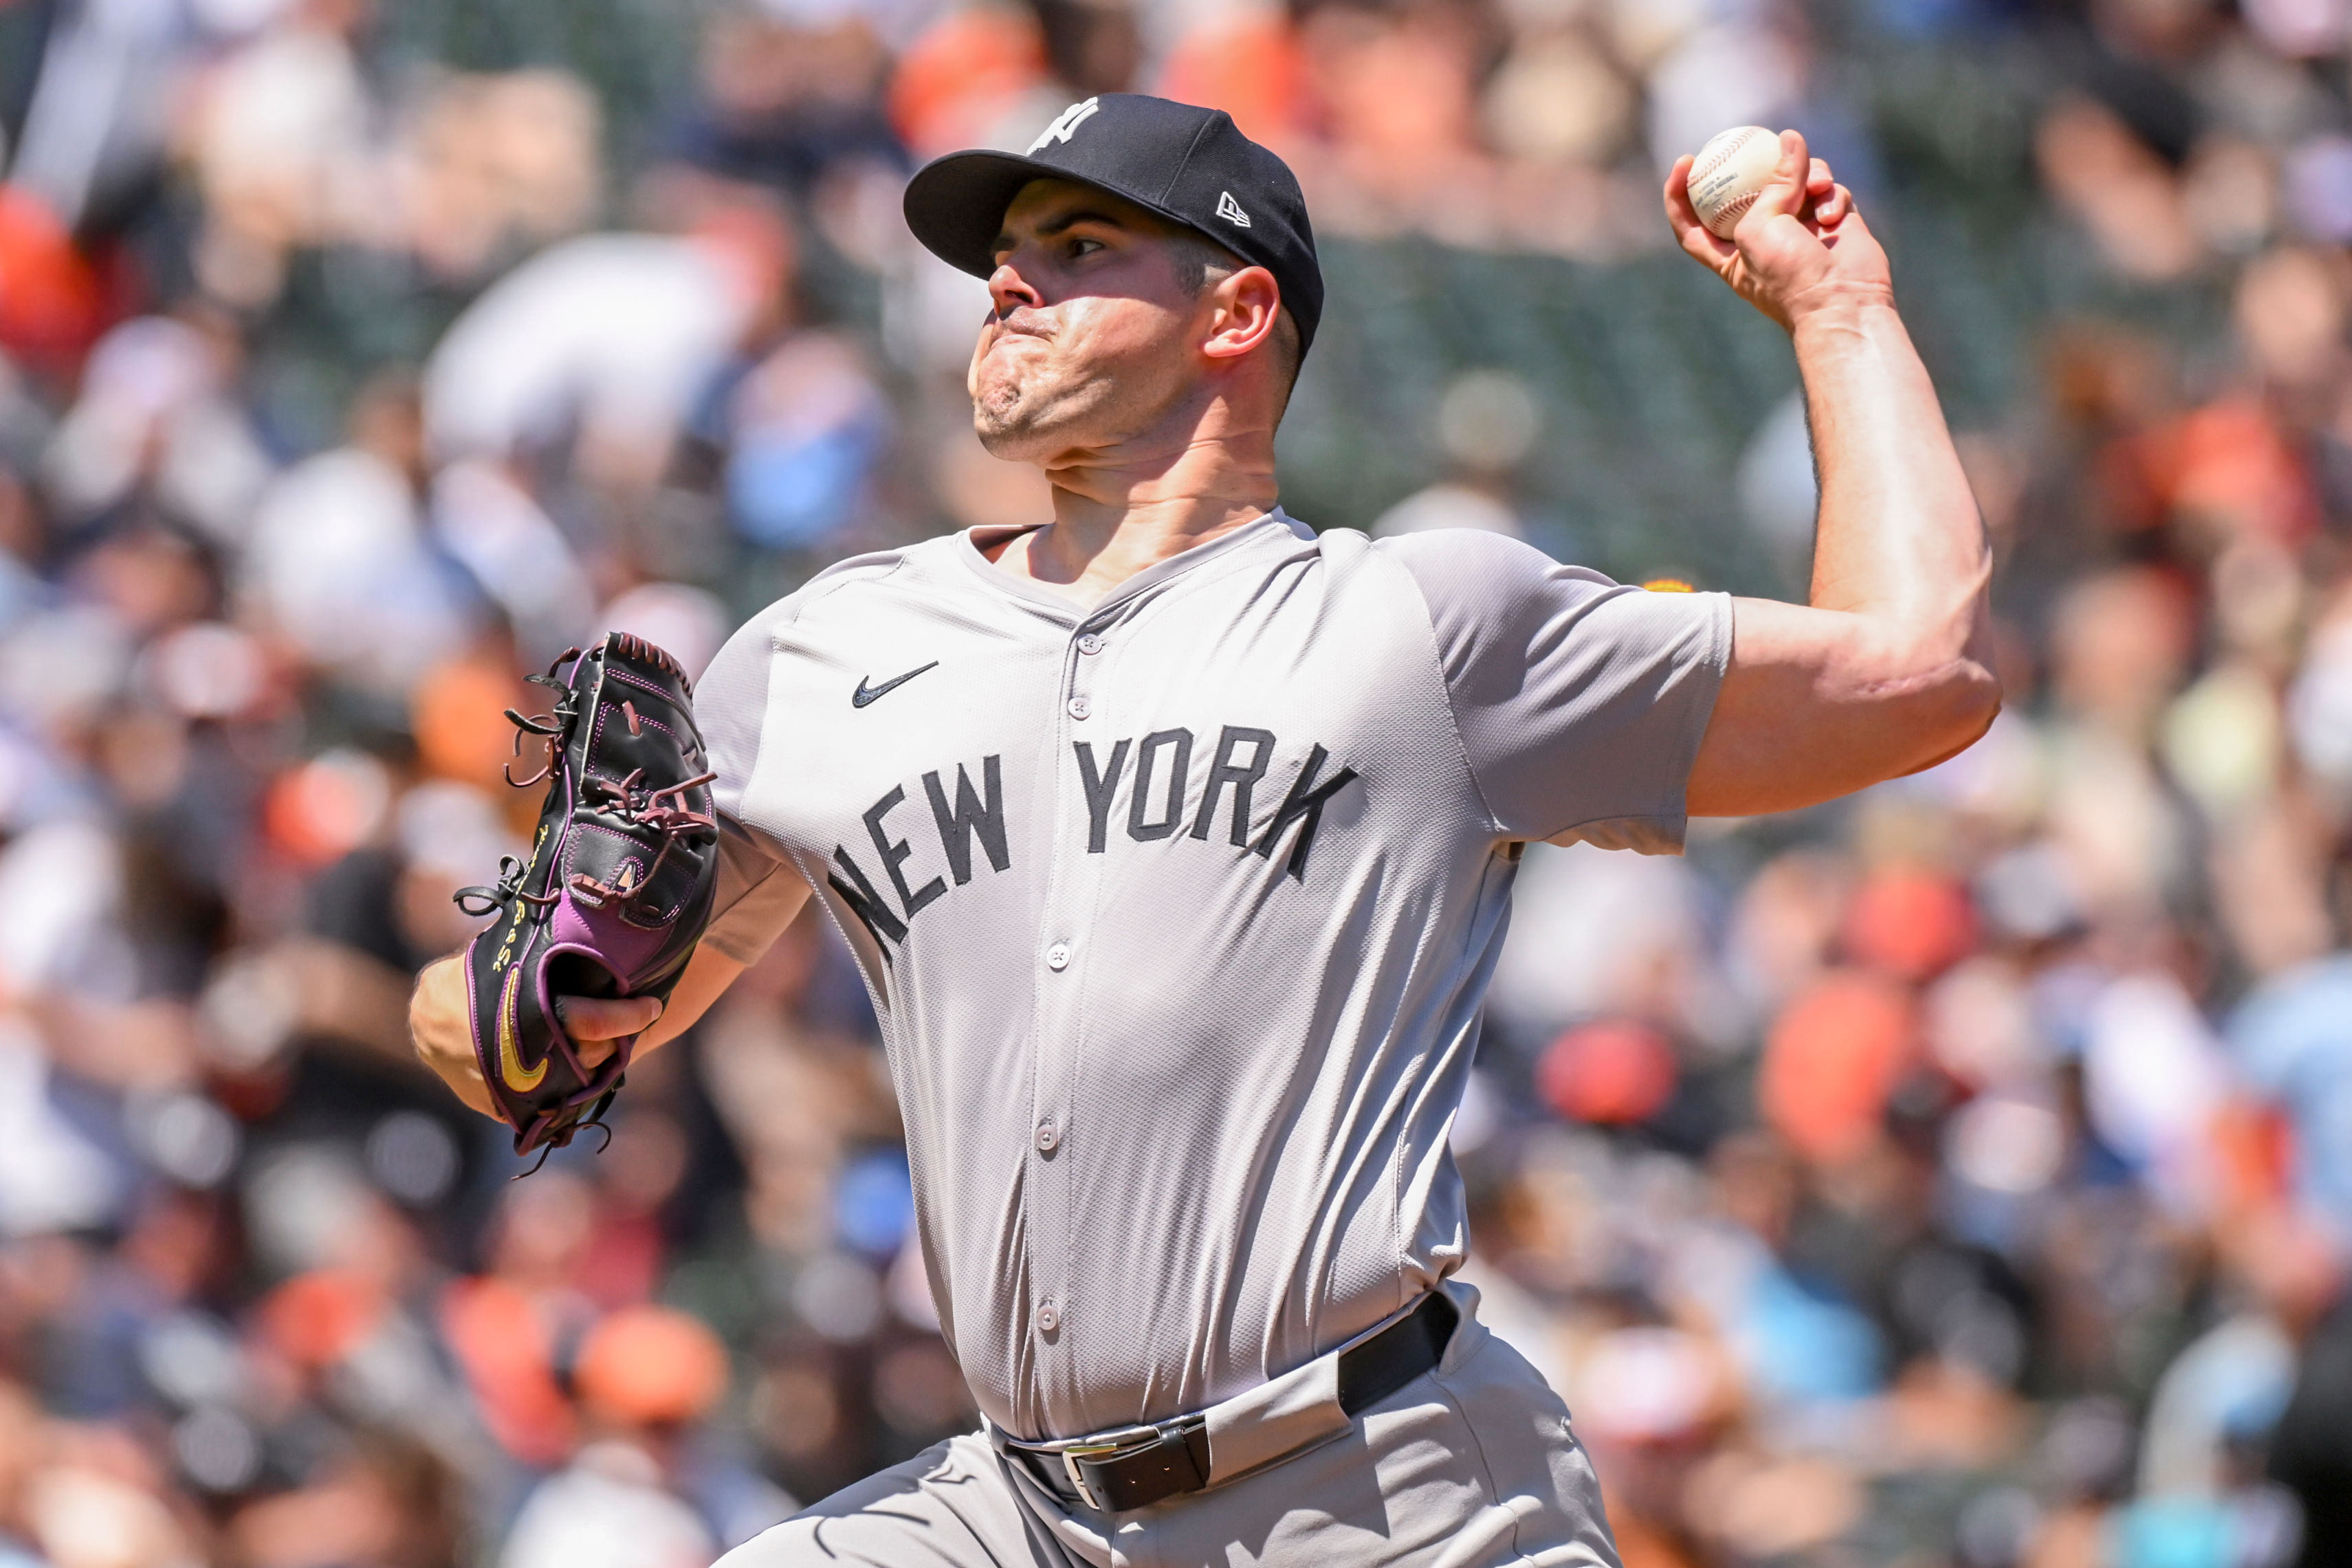 Carlos Rodon was key in the victory for the Yankees